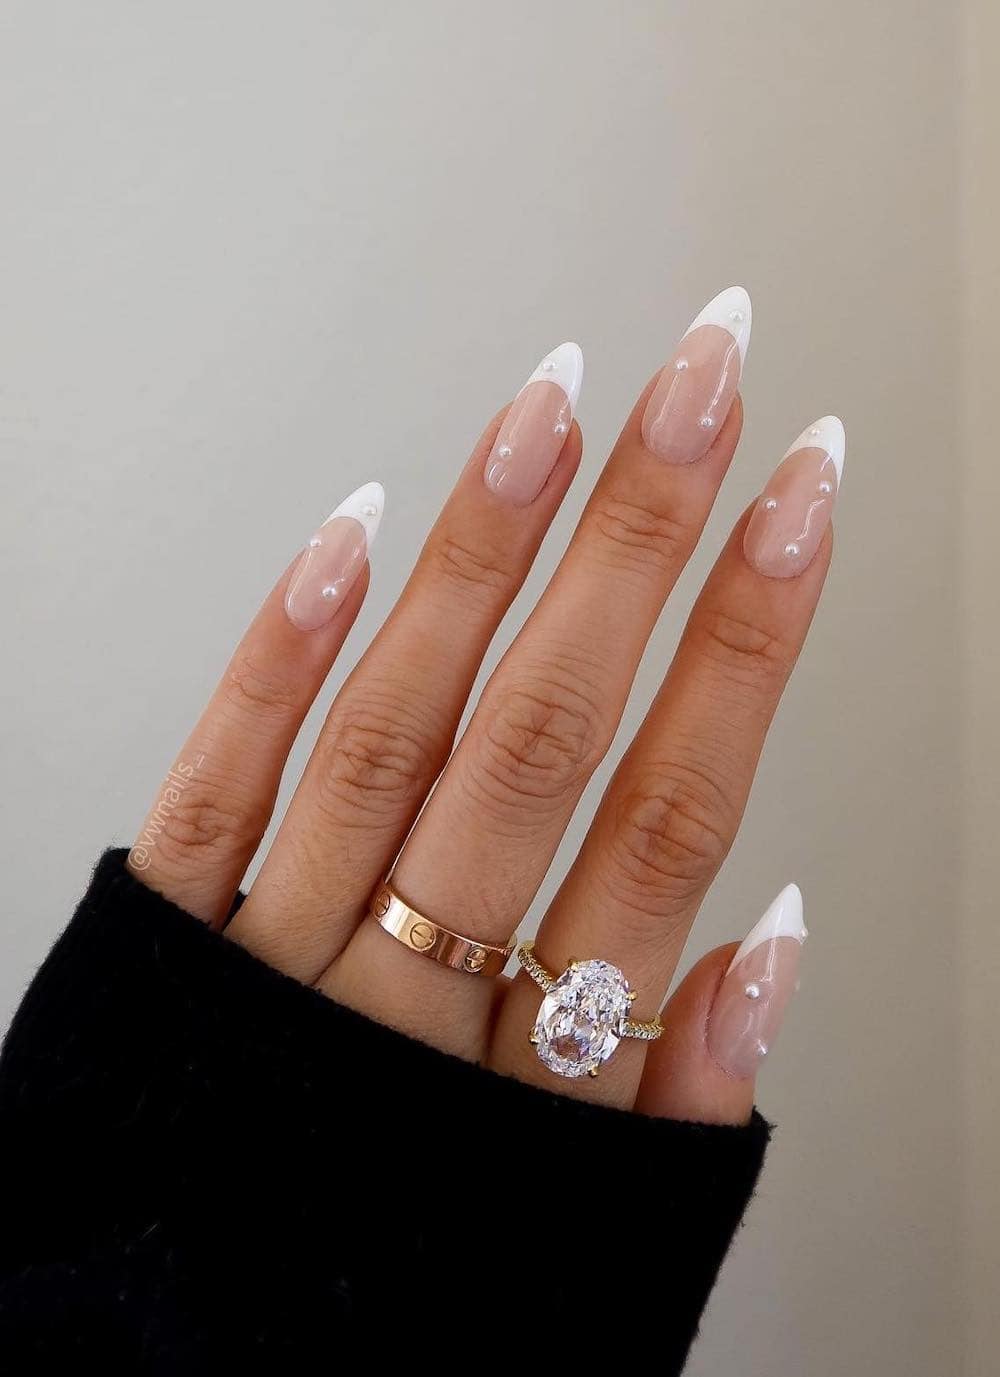 A hand with long almond nails painted with white French tips with pearl accents